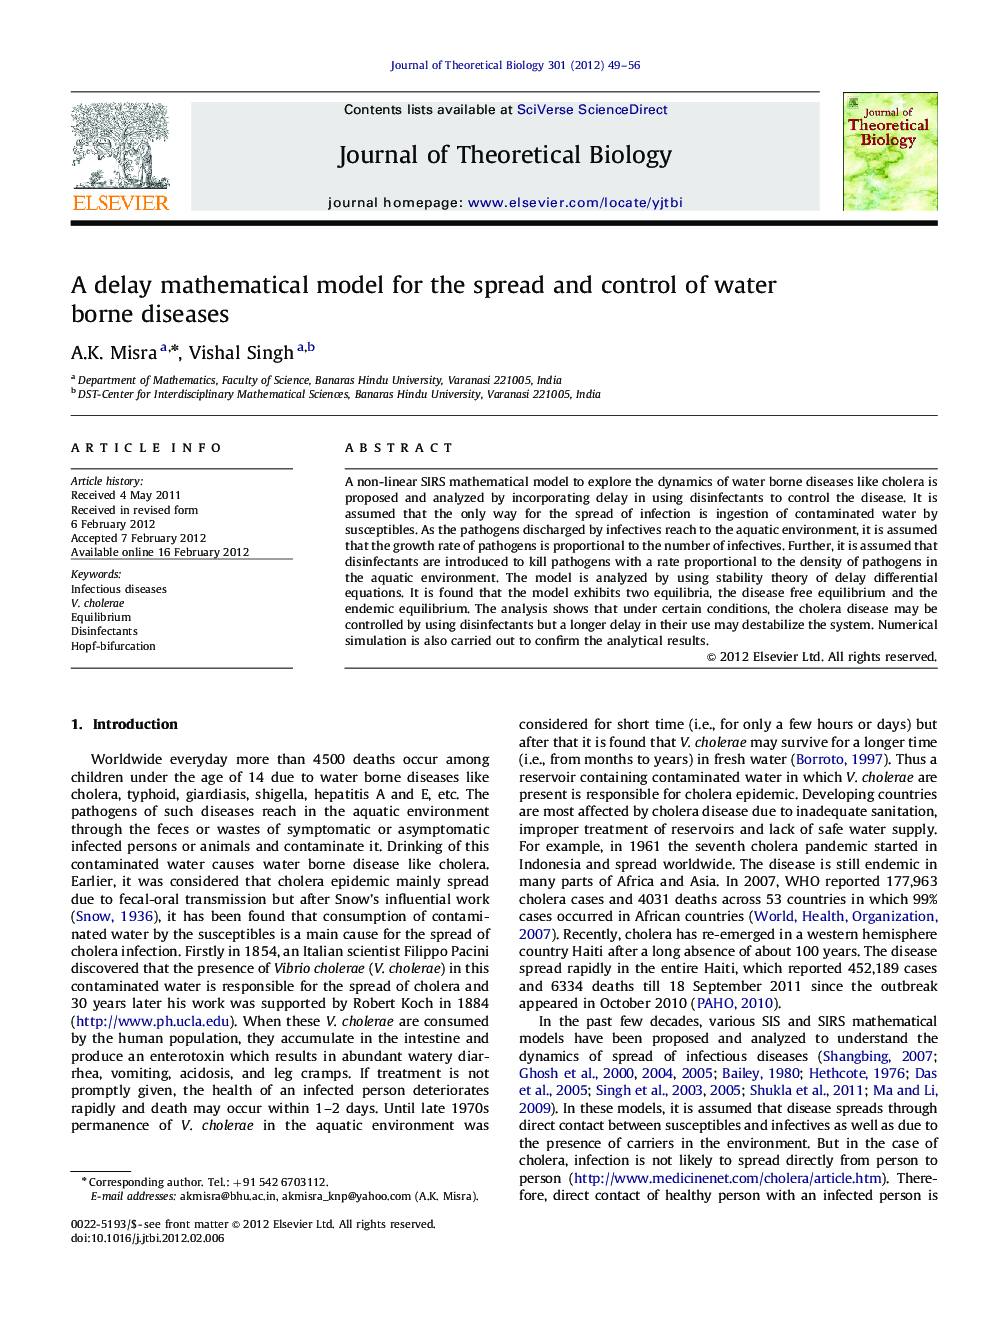 A delay mathematical model for the spread and control of water borne diseases